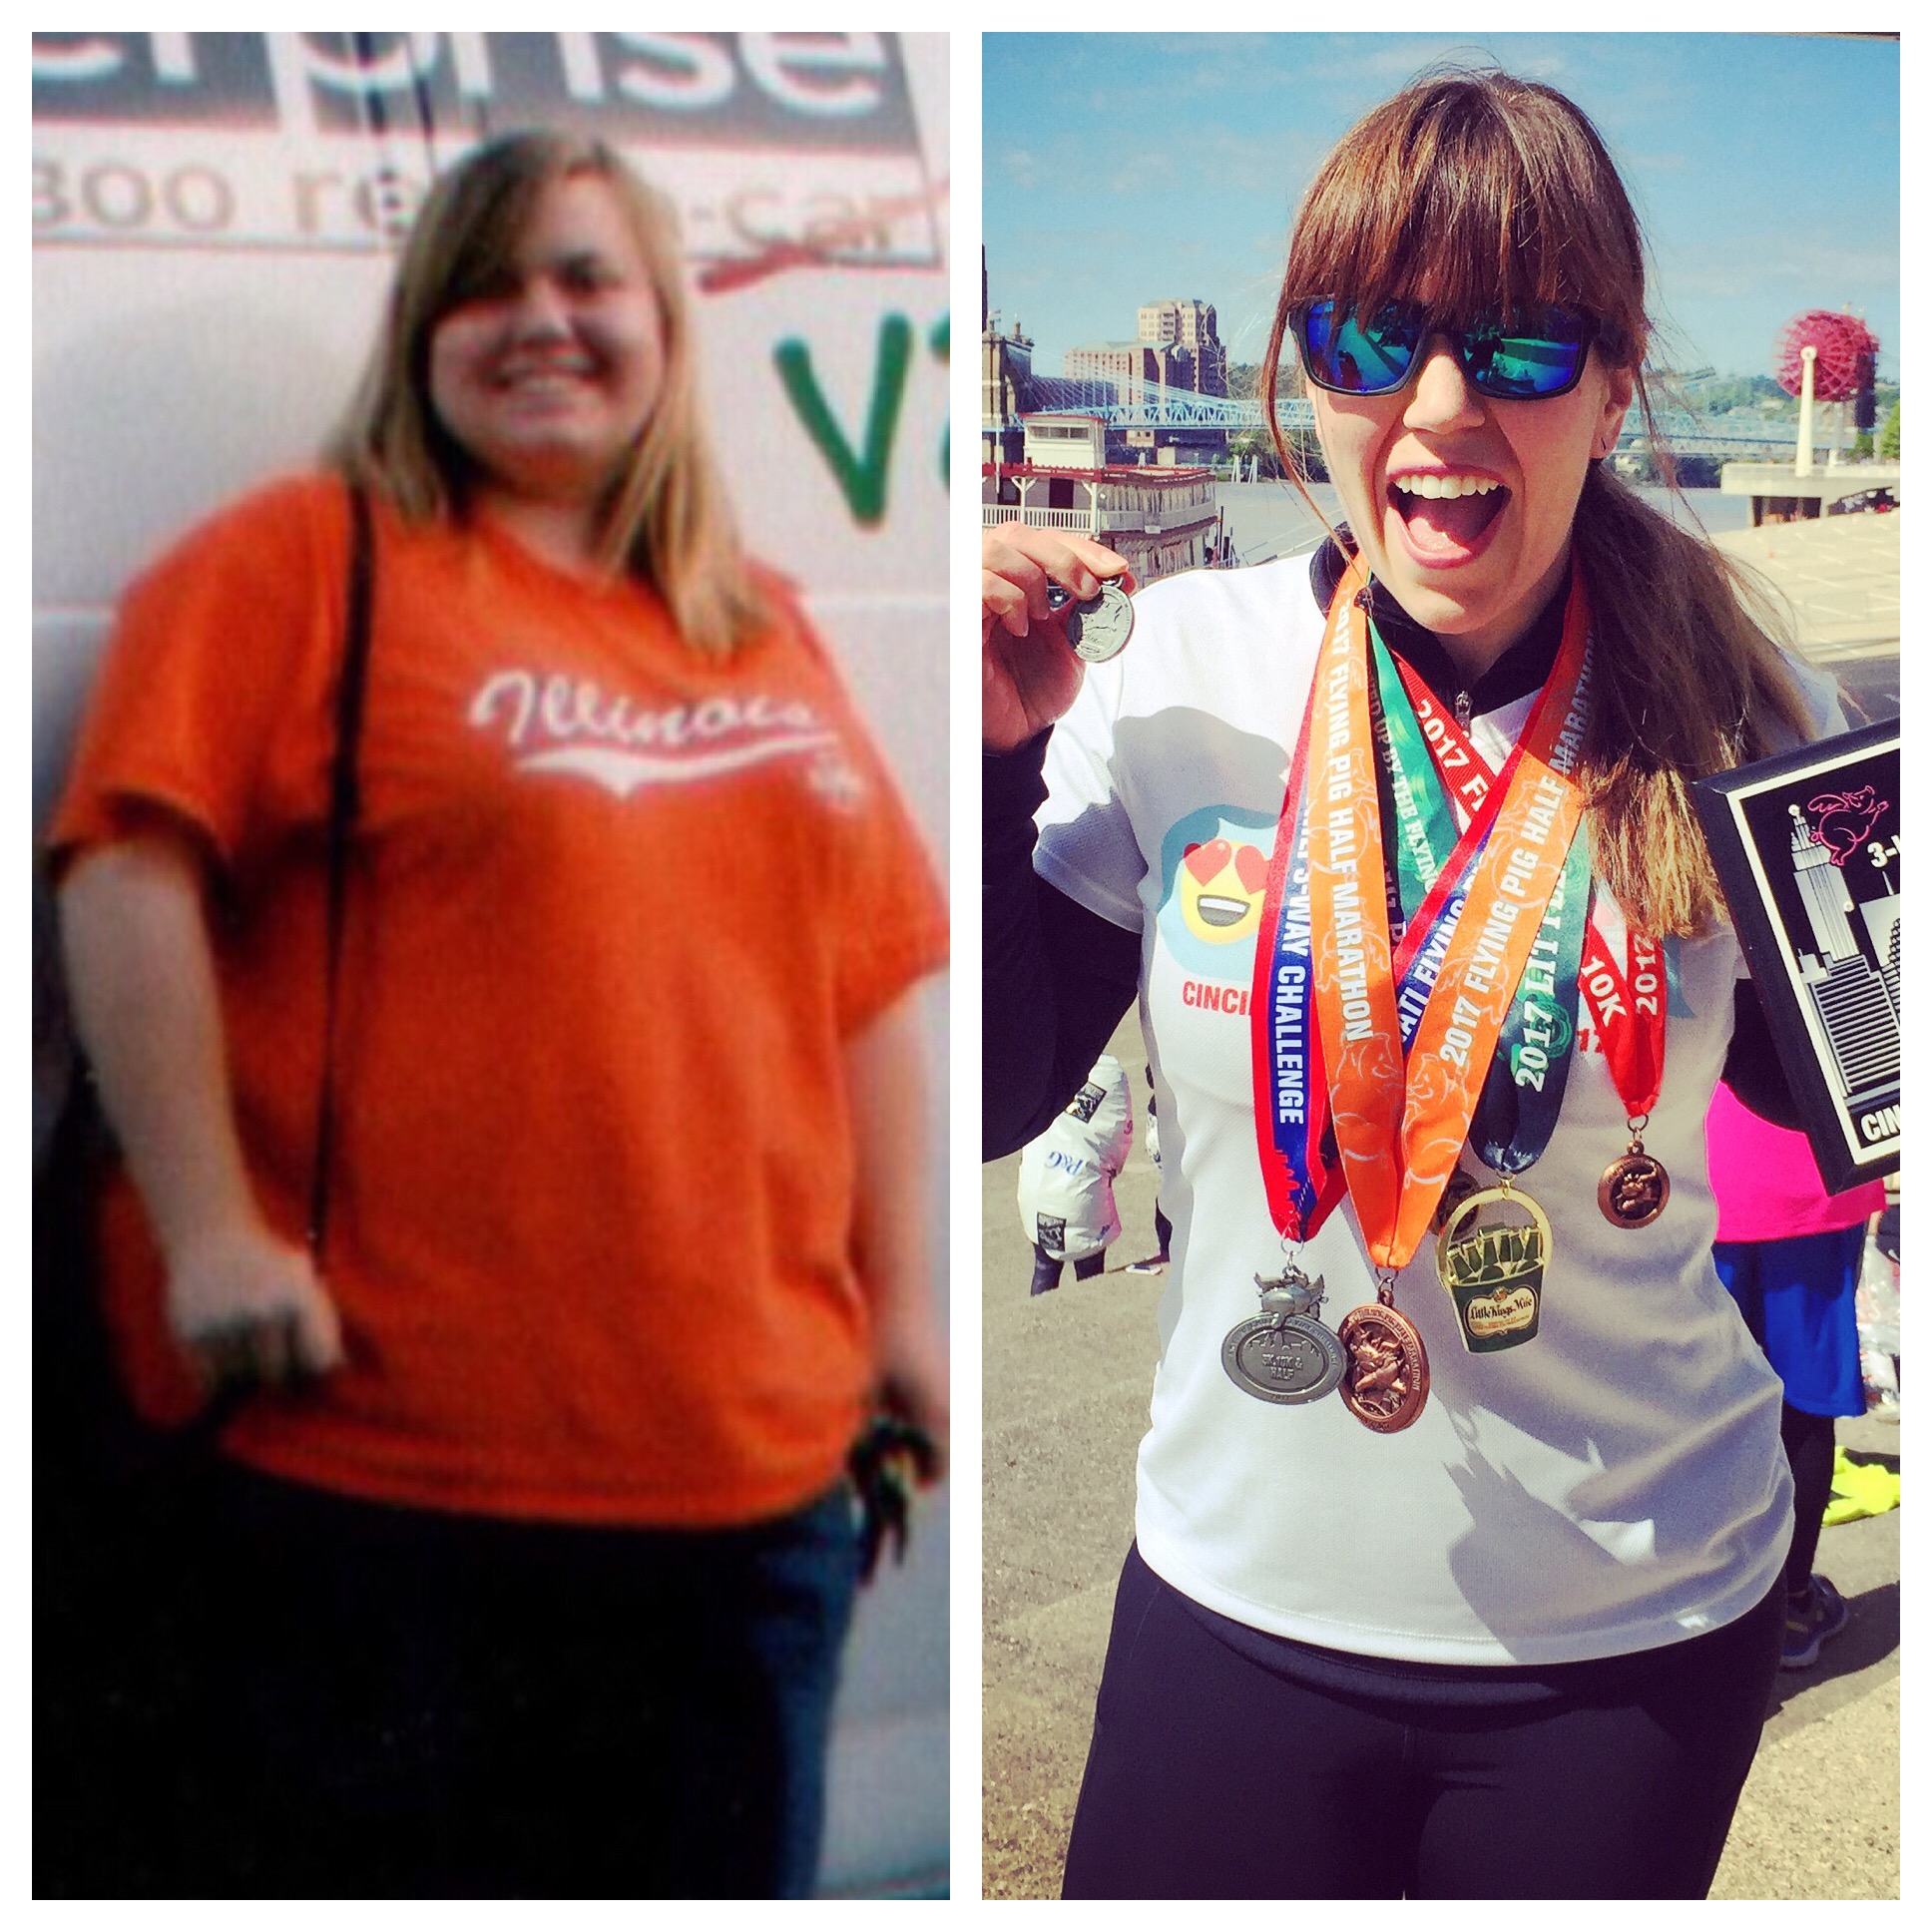 Amanda Valentine before and after losing more than 100 lbs. through healthy eating and exercise.